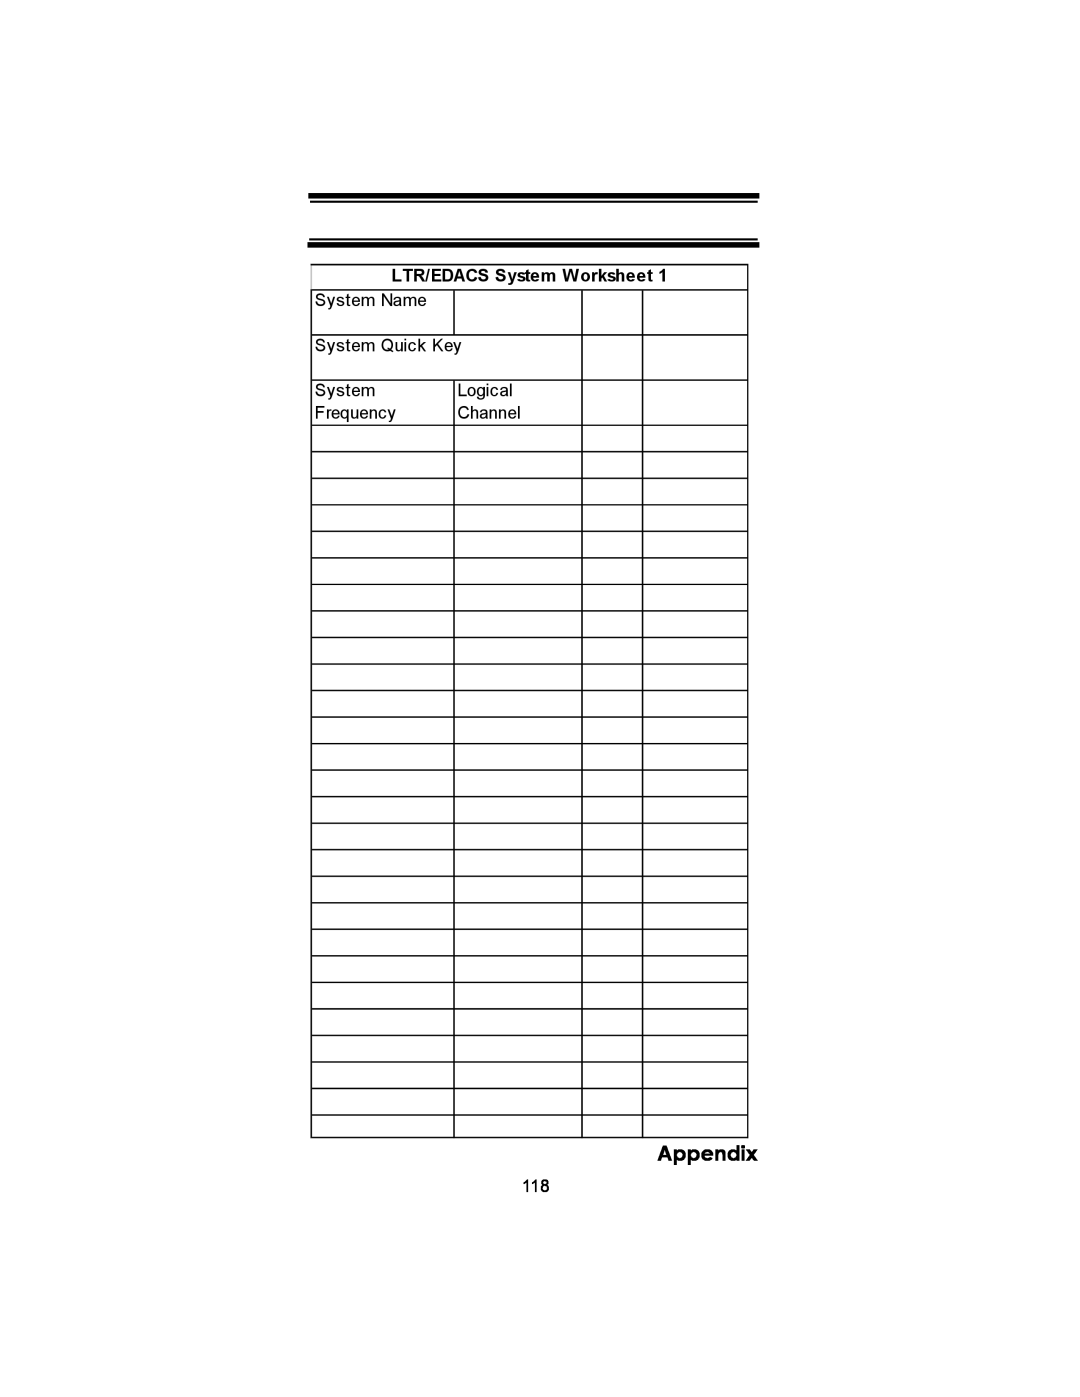 Uniden BC246T Appendix, LTR/EDACS System Worksheet, System Name System Quick Key, System Frequency, Logical Channel 